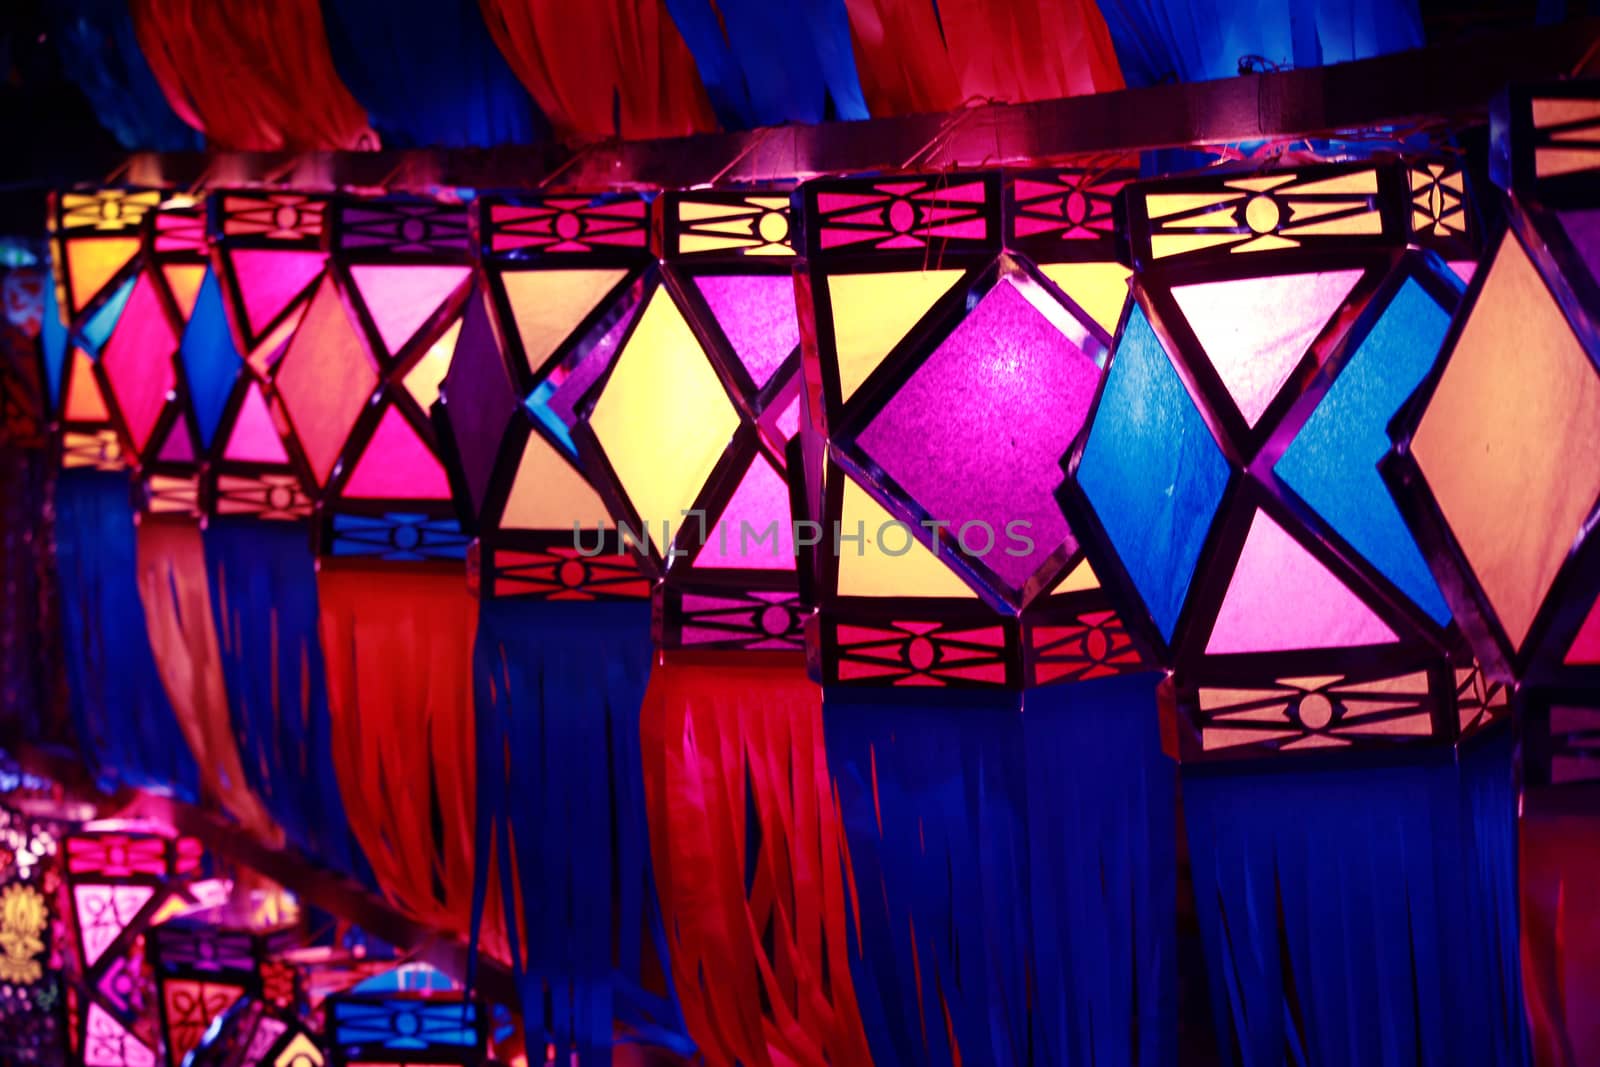 Beautiful Diwali lanterns put up in a line for decoration on the occasion of the festival.